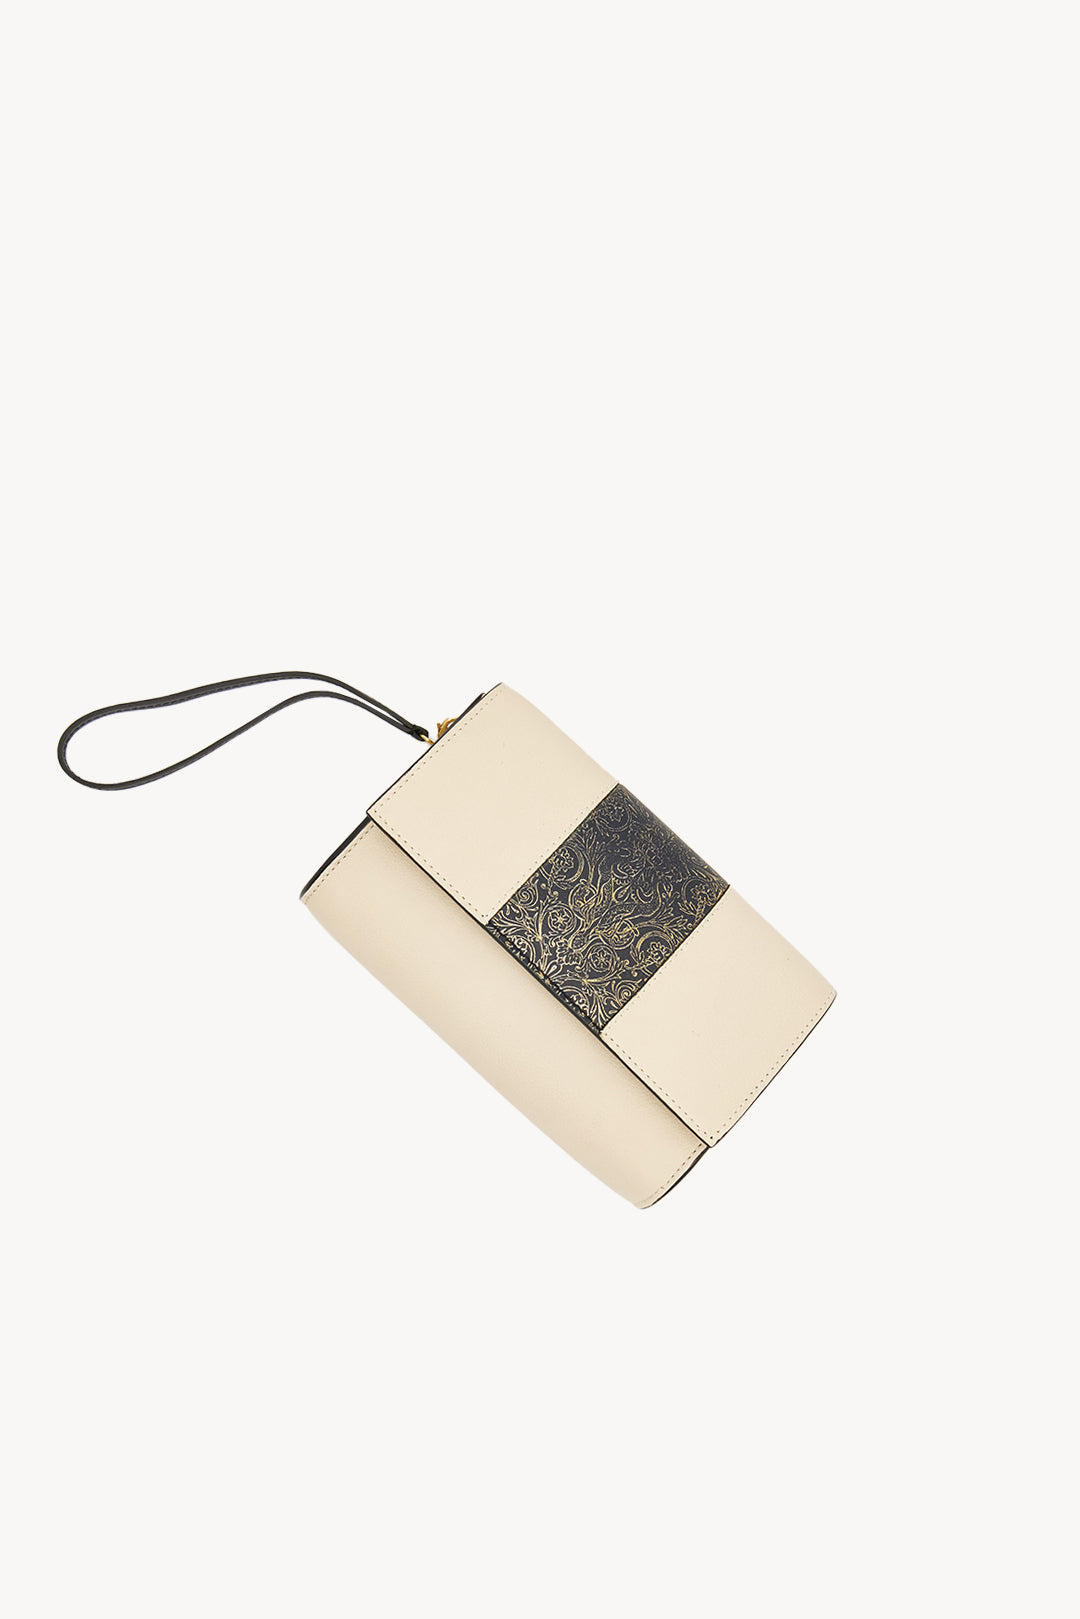 Wristlet pouch - Ivory and Black